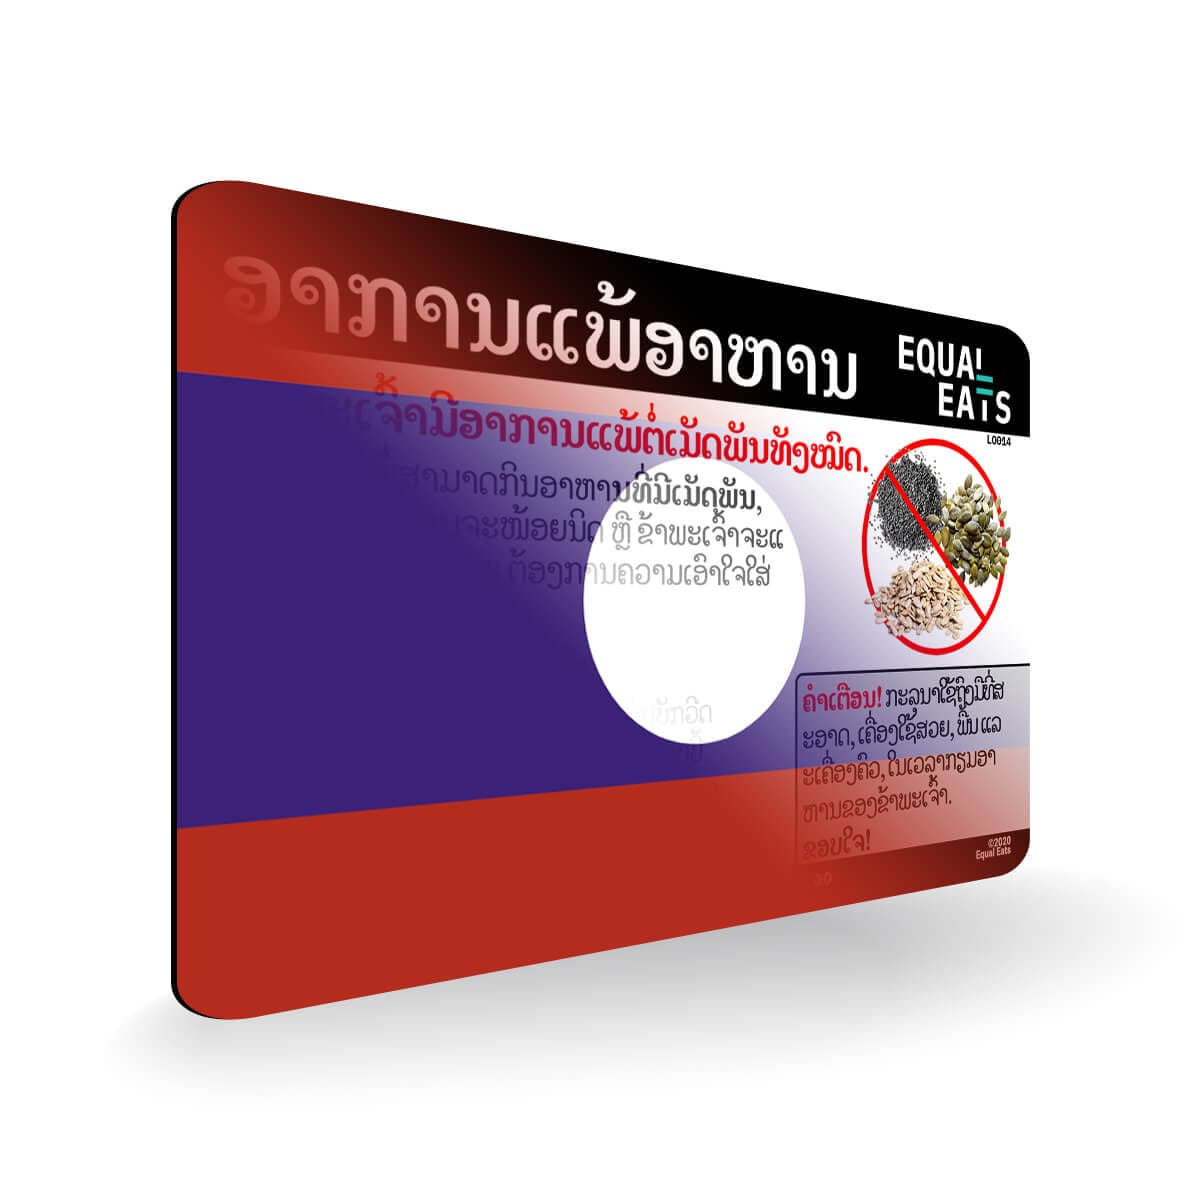 Seed Allergy in Lao. Seed Allergy Card for Laos